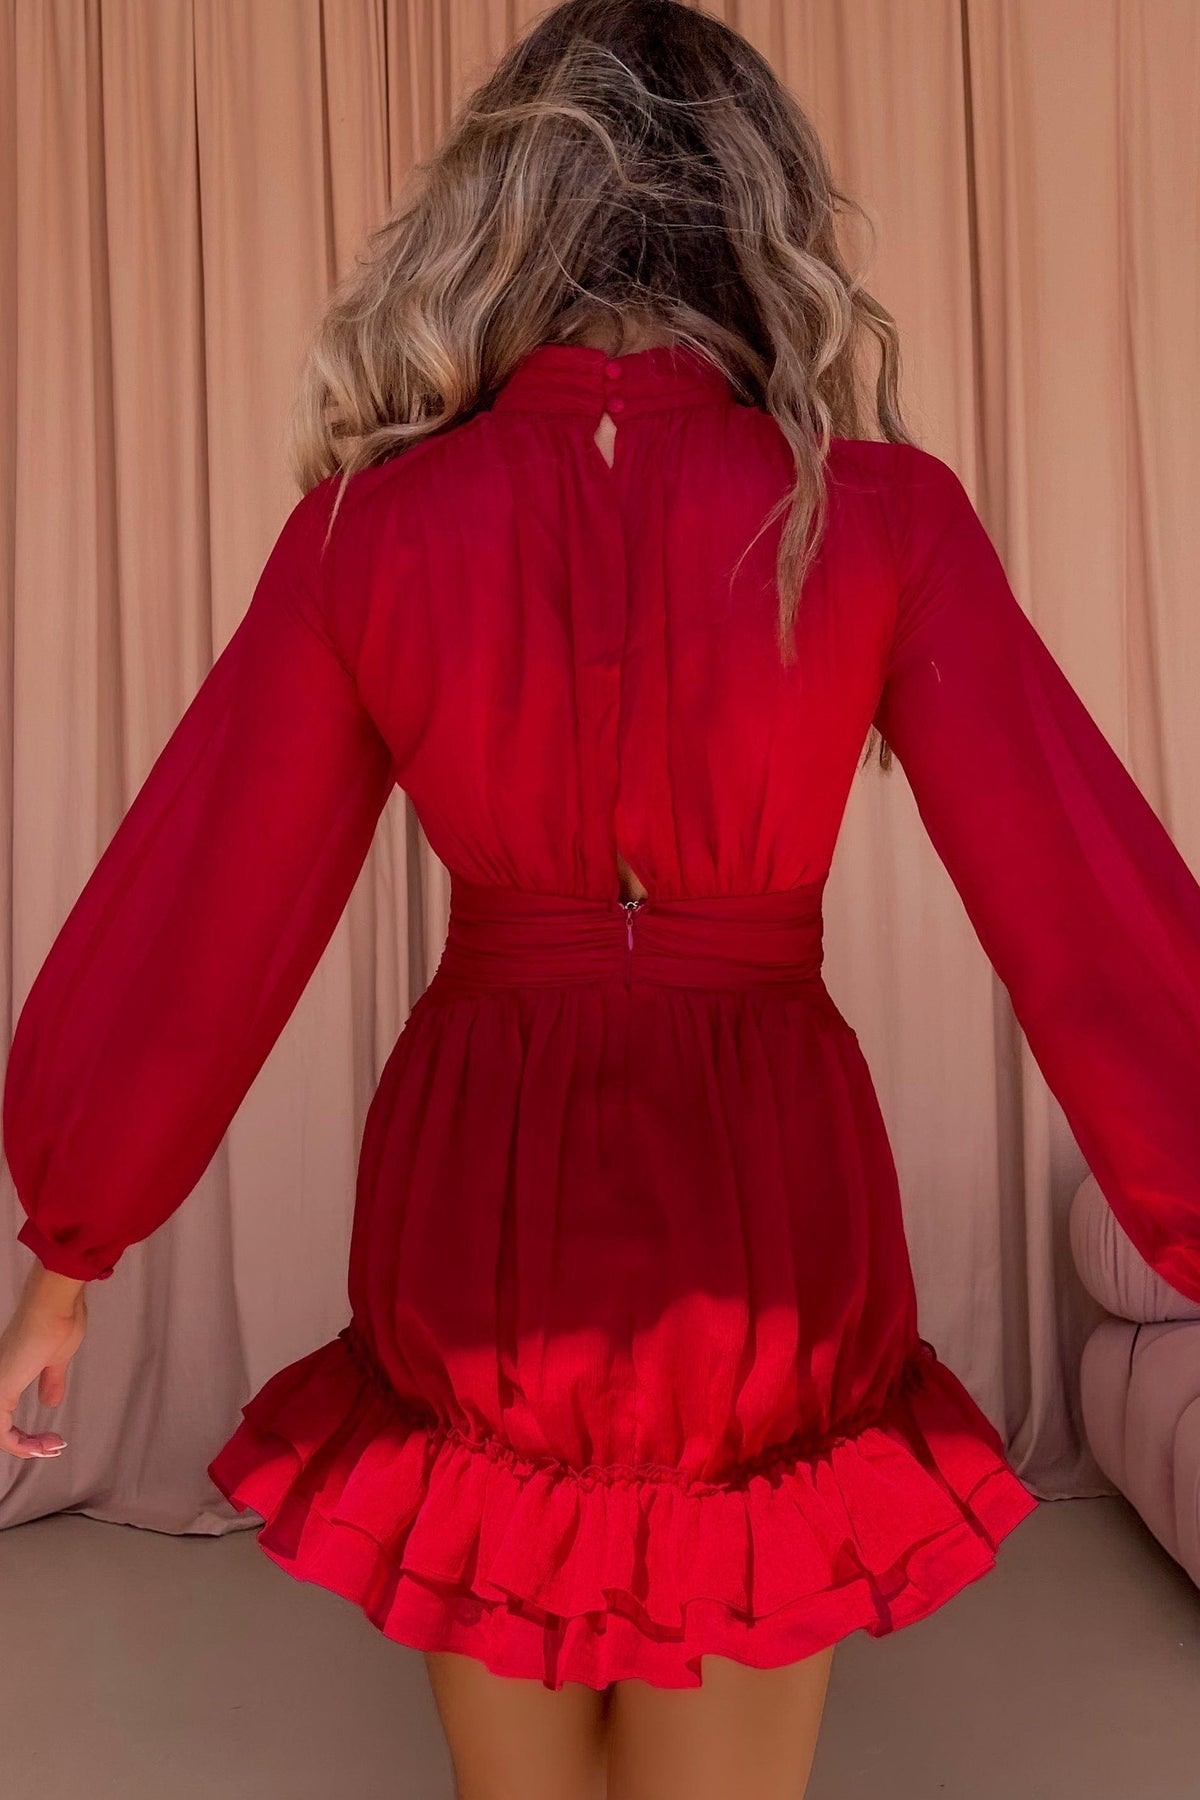 Marinia Dress, BALLOON SLEEVE, DRESS, DRESSES, HIGH NECK, LONG SLEEVE, POLYESTER, RED, RUFFLE, SALE, SPECIAL OCCASION, VINTAGE, Marinia Dress only $76.00 @ MISHKAH ONLINE FASHION BOUTIQUE, Shop The Latest Women&#39;s Dresses - Our New Marinia Dress is only $76.00, @ MISHKAH ONLINE FASHION BOUTIQUE-MISHKAH